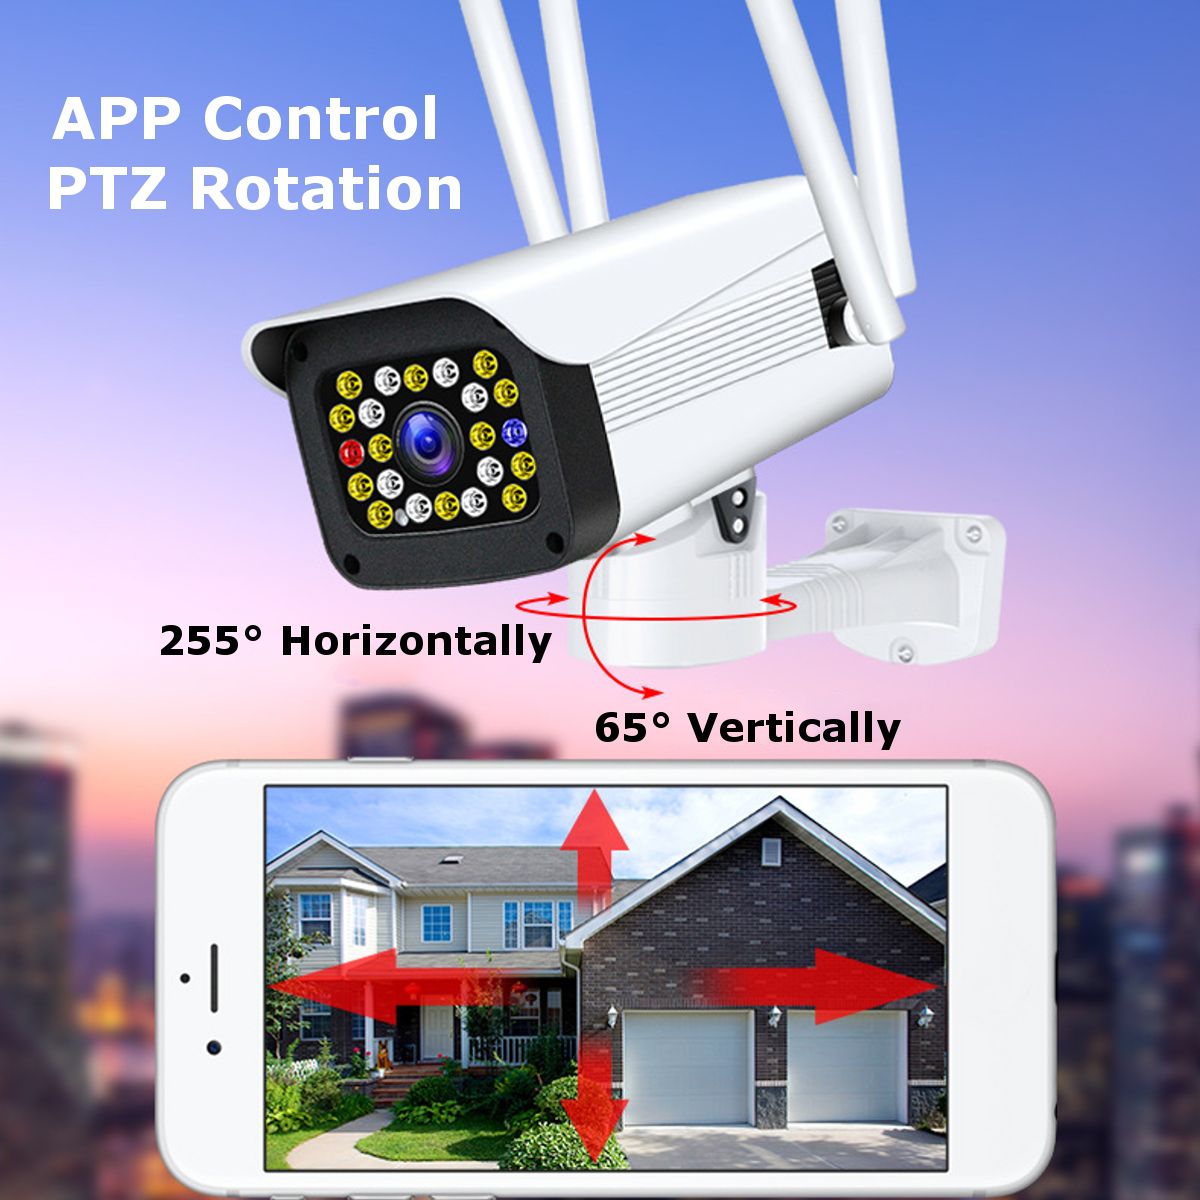 22-LED-12V-High-Speed-WiFi-HD-1080P-Action-Detection-Surveillance-Night-Vision-Camera-H265-Two-Way-A-1706011